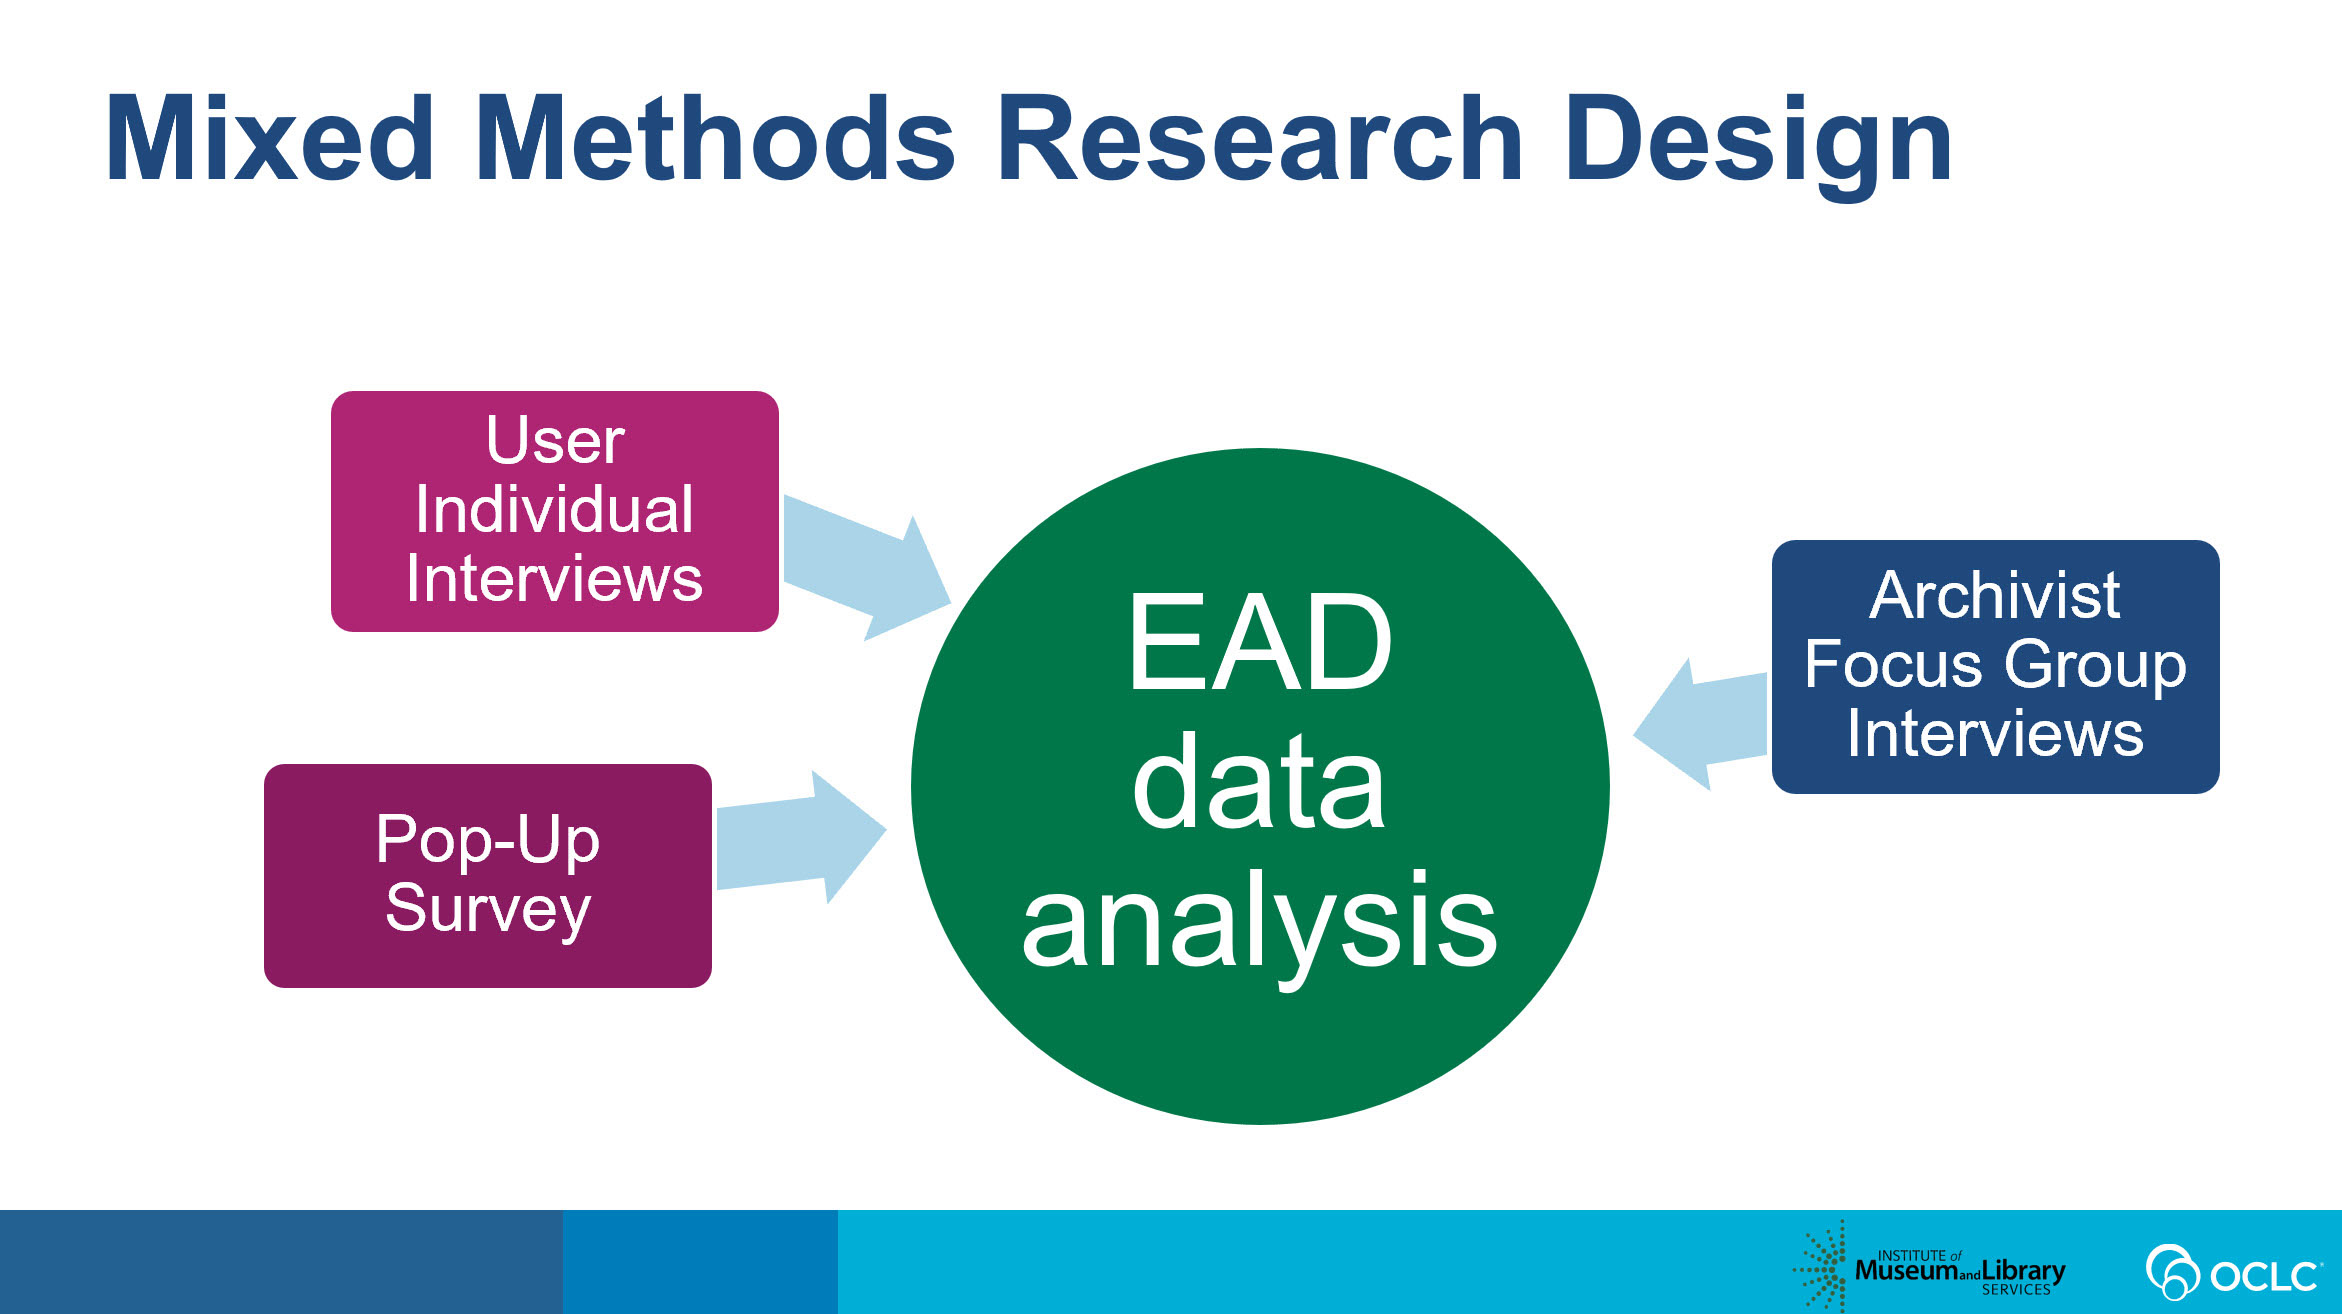 Mixed Method Research Design Diagram. EAD data analysis surrounded by user interviews, pop-up survey, and archivist focus group interviews.